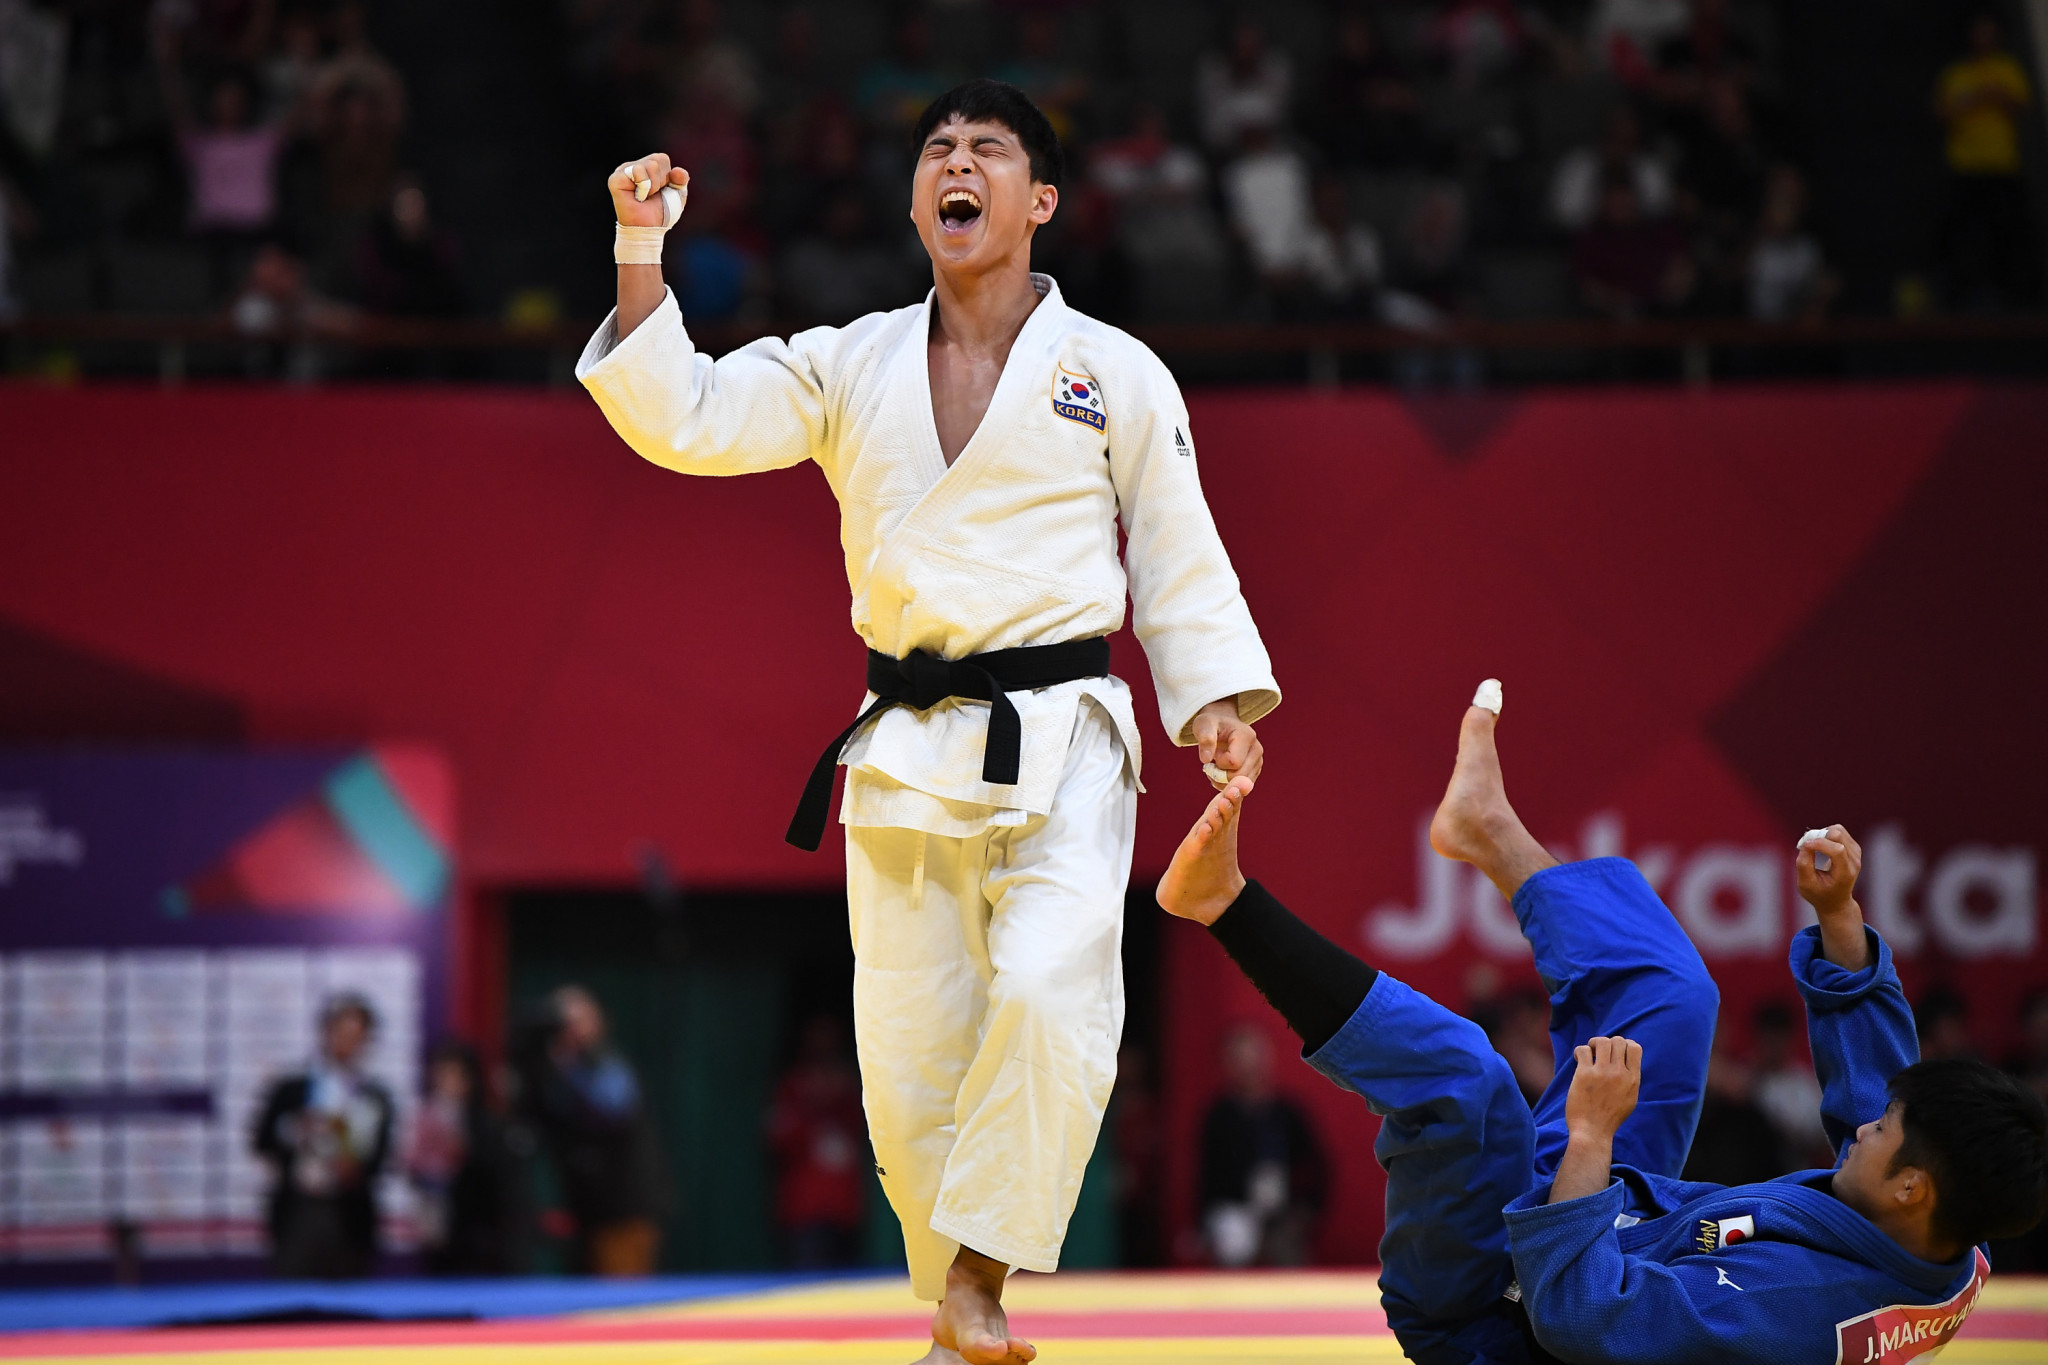 South Korean judoka banned for six months over false community service records